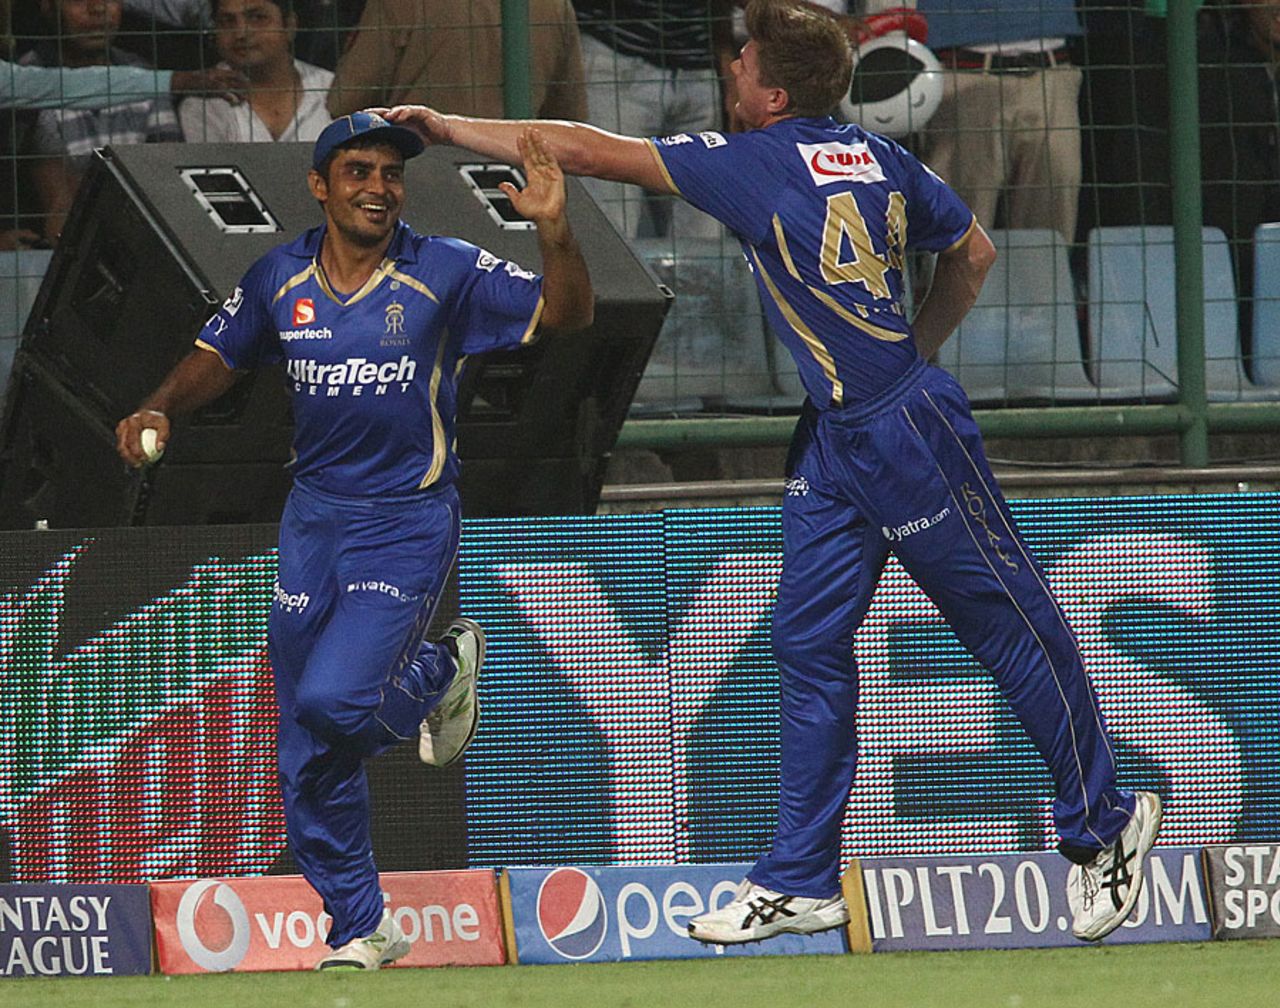 Rajat Bhatia is congratulated by James Faulkner for taking a catch at the boundary's edge, Delhi Daredevils v Rajasthan Royals, IPL, Delhi, May 3, 2014